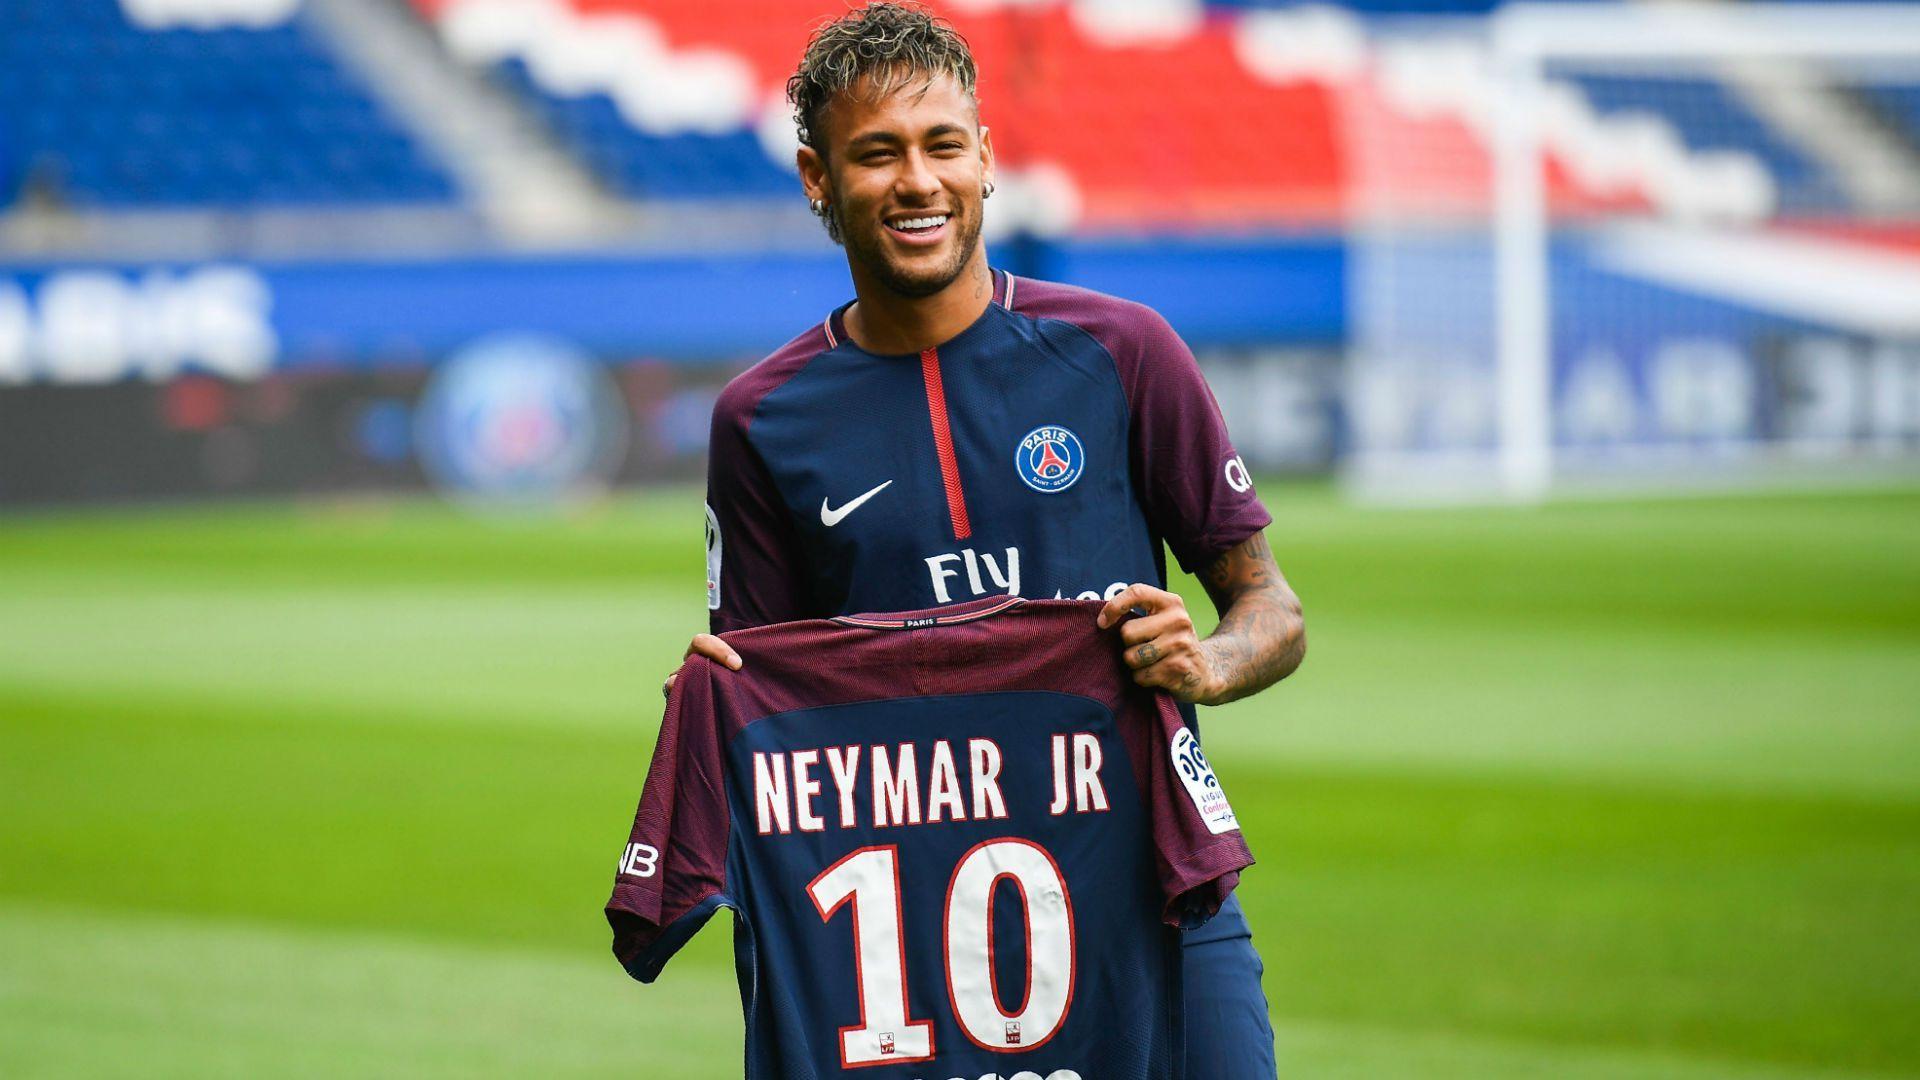 Neymar's chances of winning Ballon D'or after move to PSG